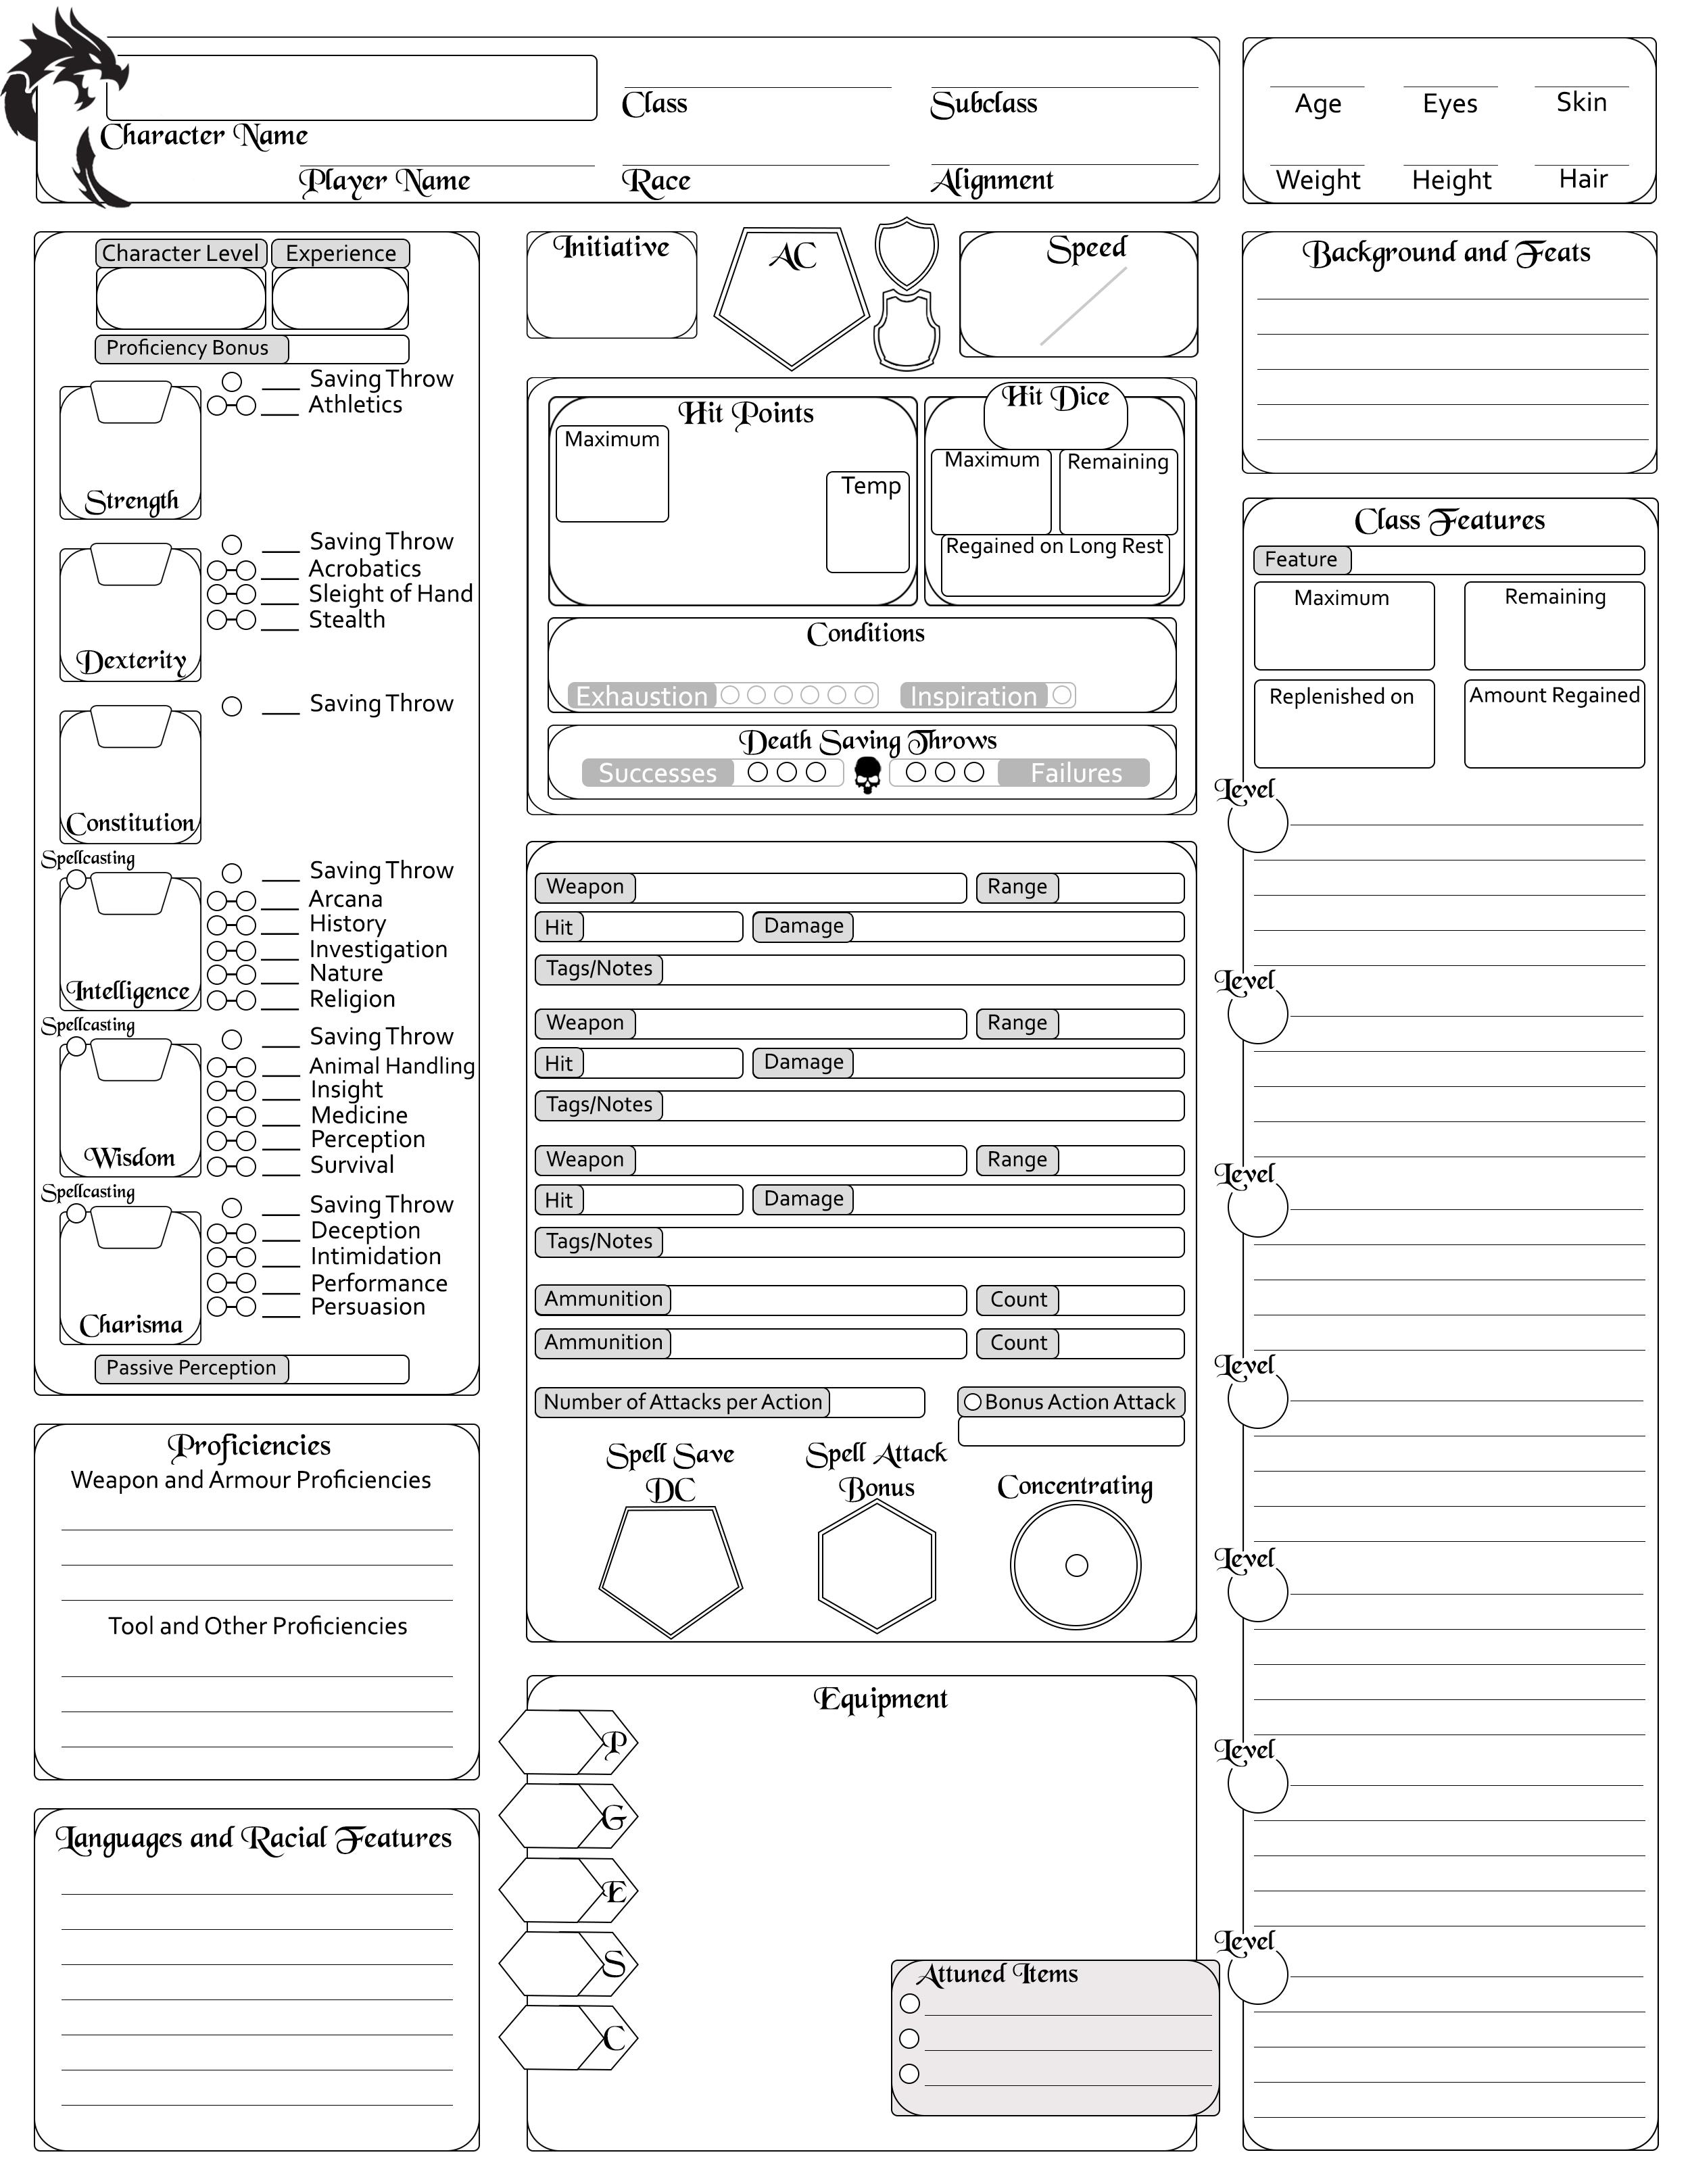 Dnd 5e Charactersheet Form Fillable - Printable Forms Free Online